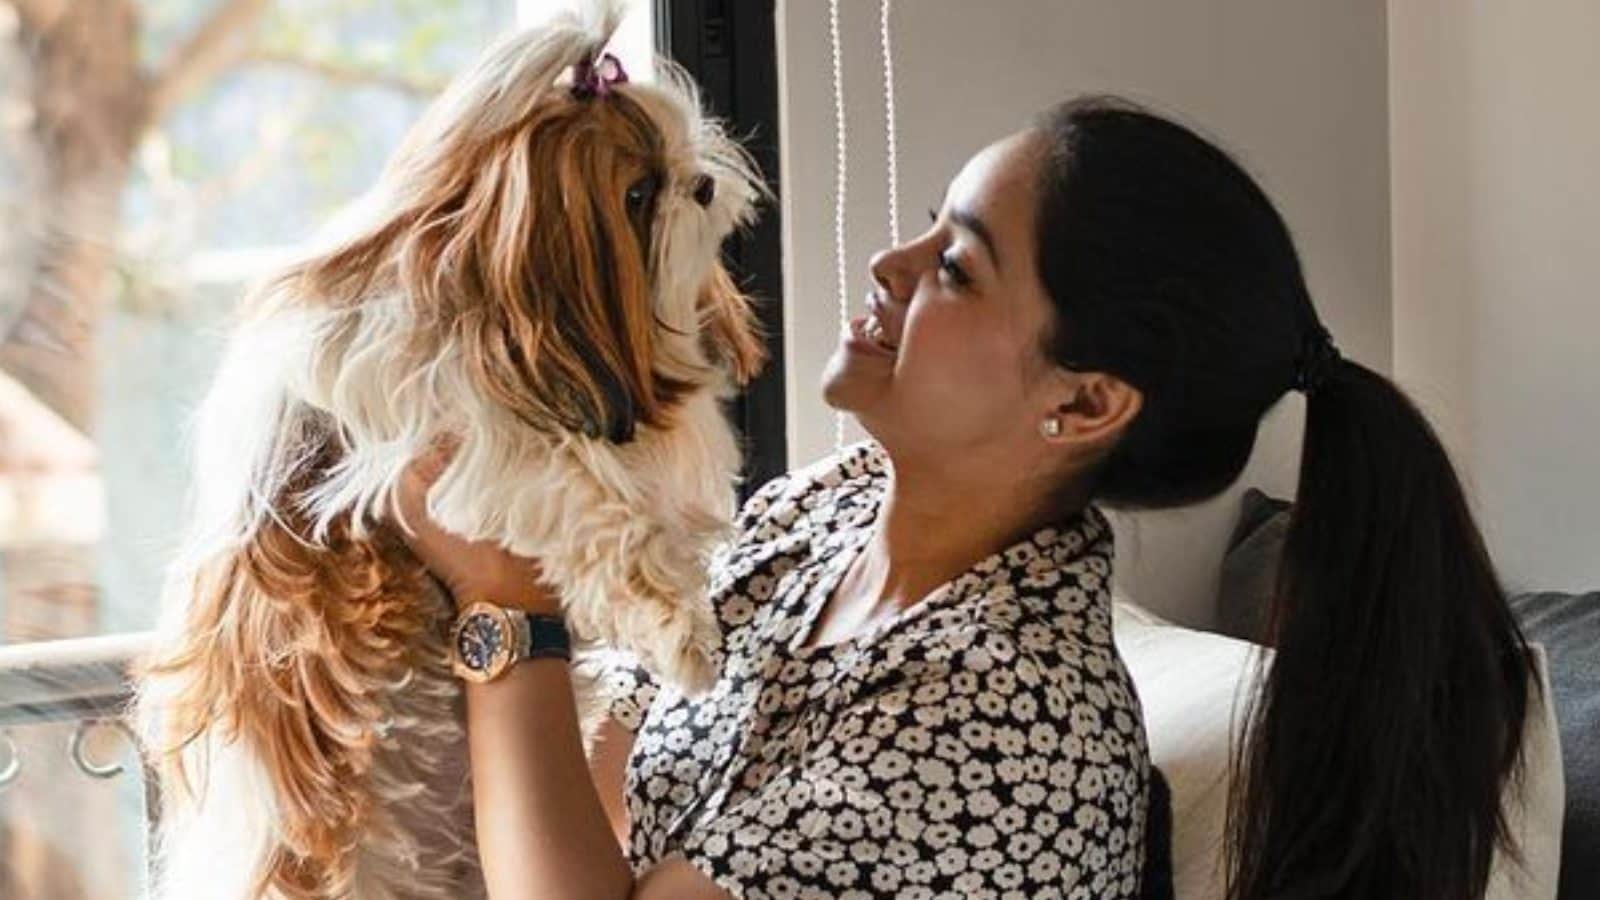 Sumana Chakraborty mourns death of her pet dog, says ‘will live with this void’